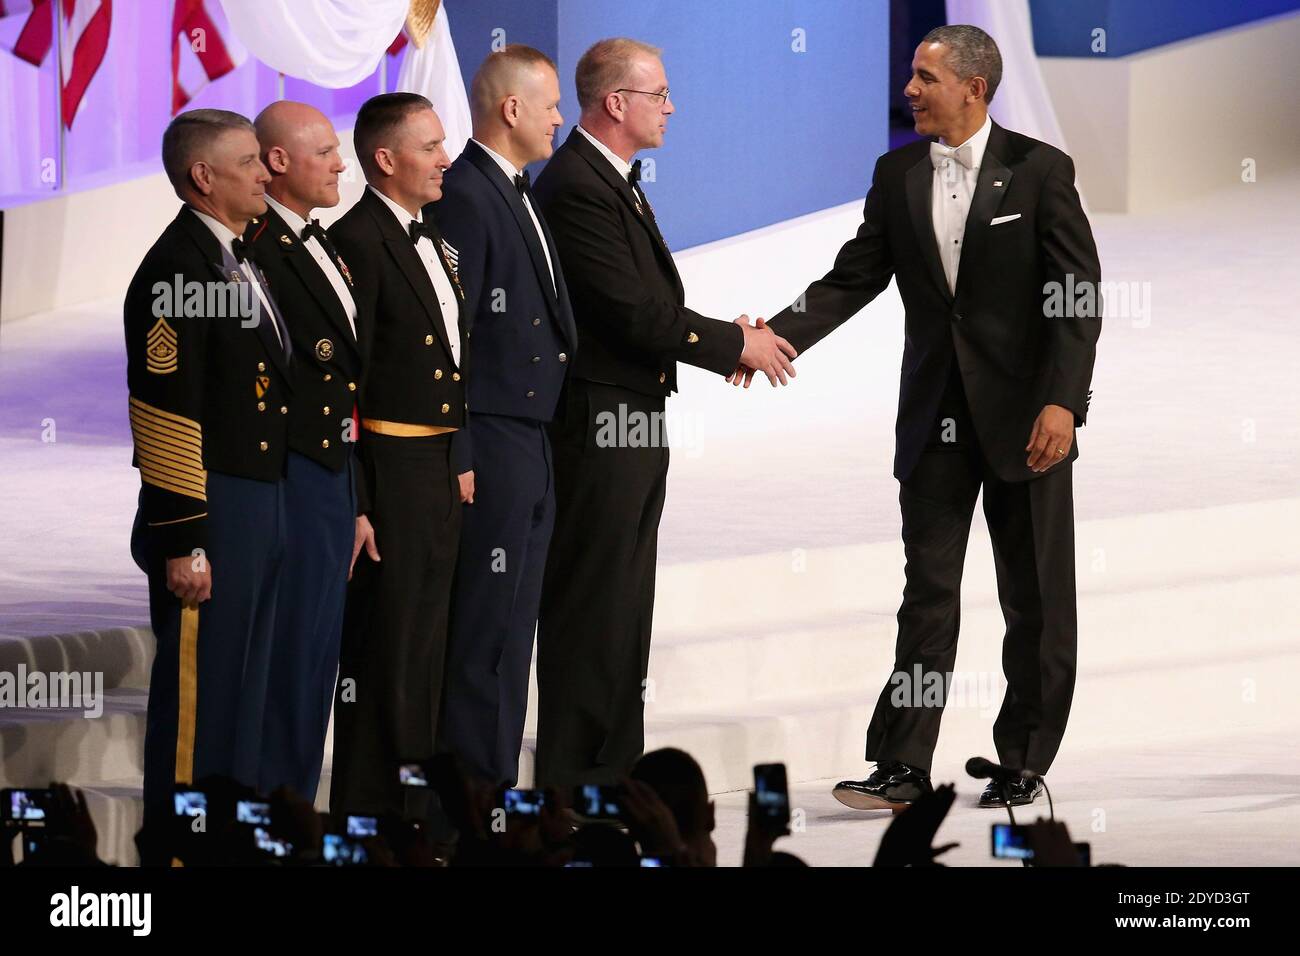 U.S. President Barack Obama (R) thanks (L-R) Sergeant Major of the Army Raymond Chandler, Sergeant Major of the Marine Corps Micheal Barrett, Master Chief Petty Officer of the Navy Michael Stevens, Chief Master Sergeant of the Air Force James Roy and Master Chief Petty Officer of the Coast Guard Michael Leavitt during the Commander-In-Chief Ball at the Walter Washington Convention Center in Washington, DC on January 21, 2013. President Obama started his second term by taking the Oath of Office earlier in the day during a ceremony on the West Front of the U.S. Capitol. Photo by Chip Somodevilla Stock Photo